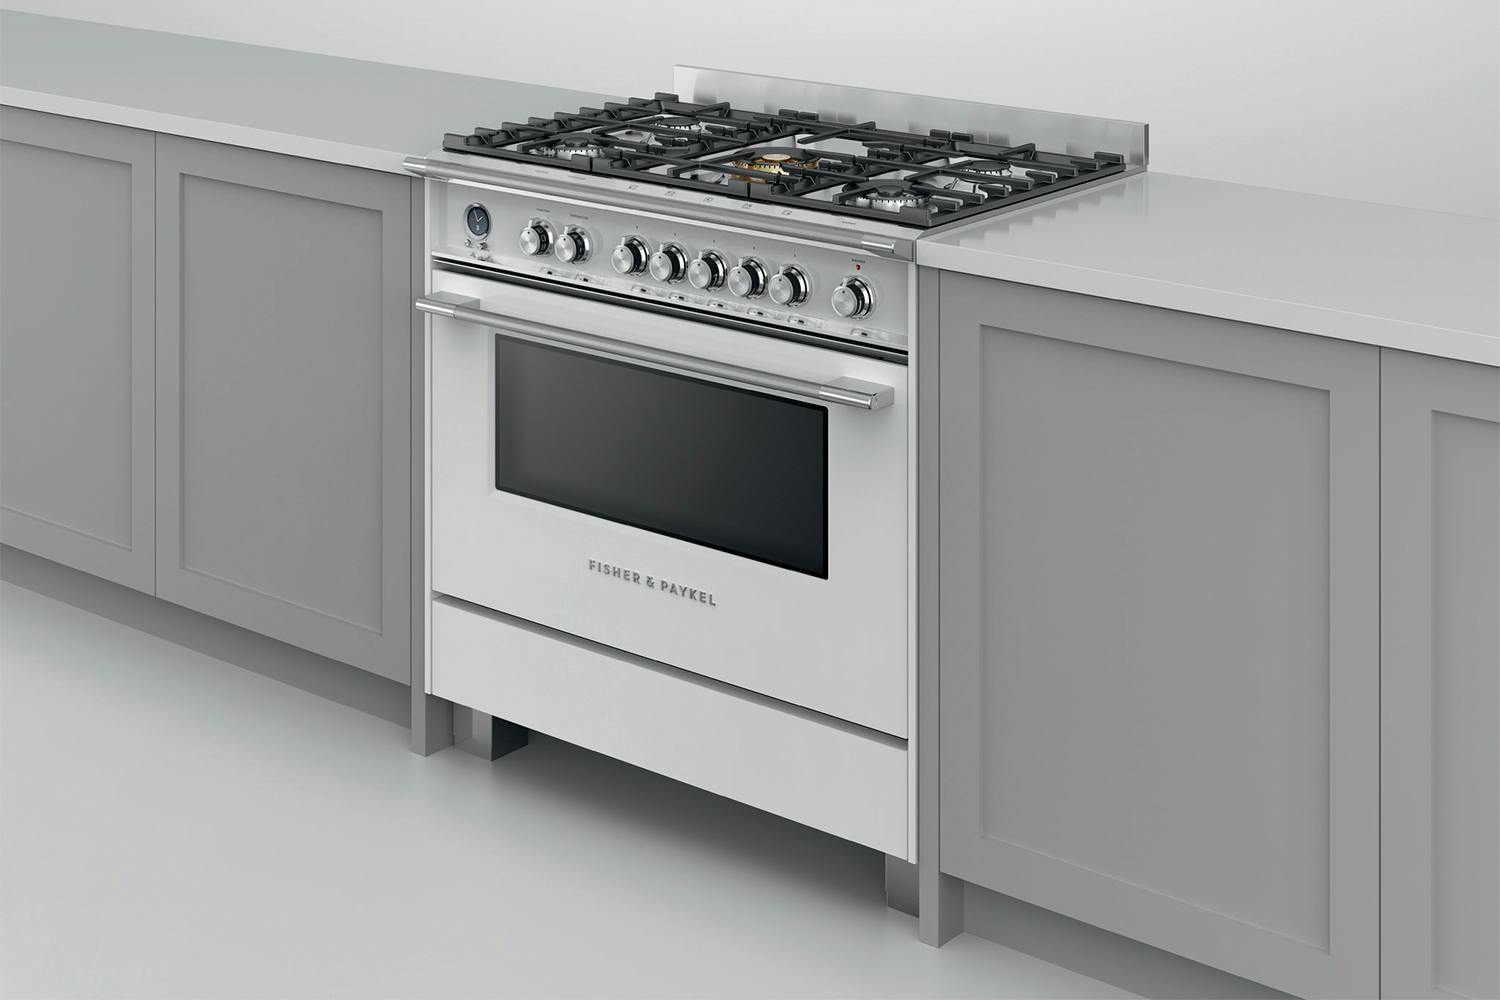 Fisher & Paykel 90cm Freestanding Dual Fuel Cooker w/ Gas Cooktop - White